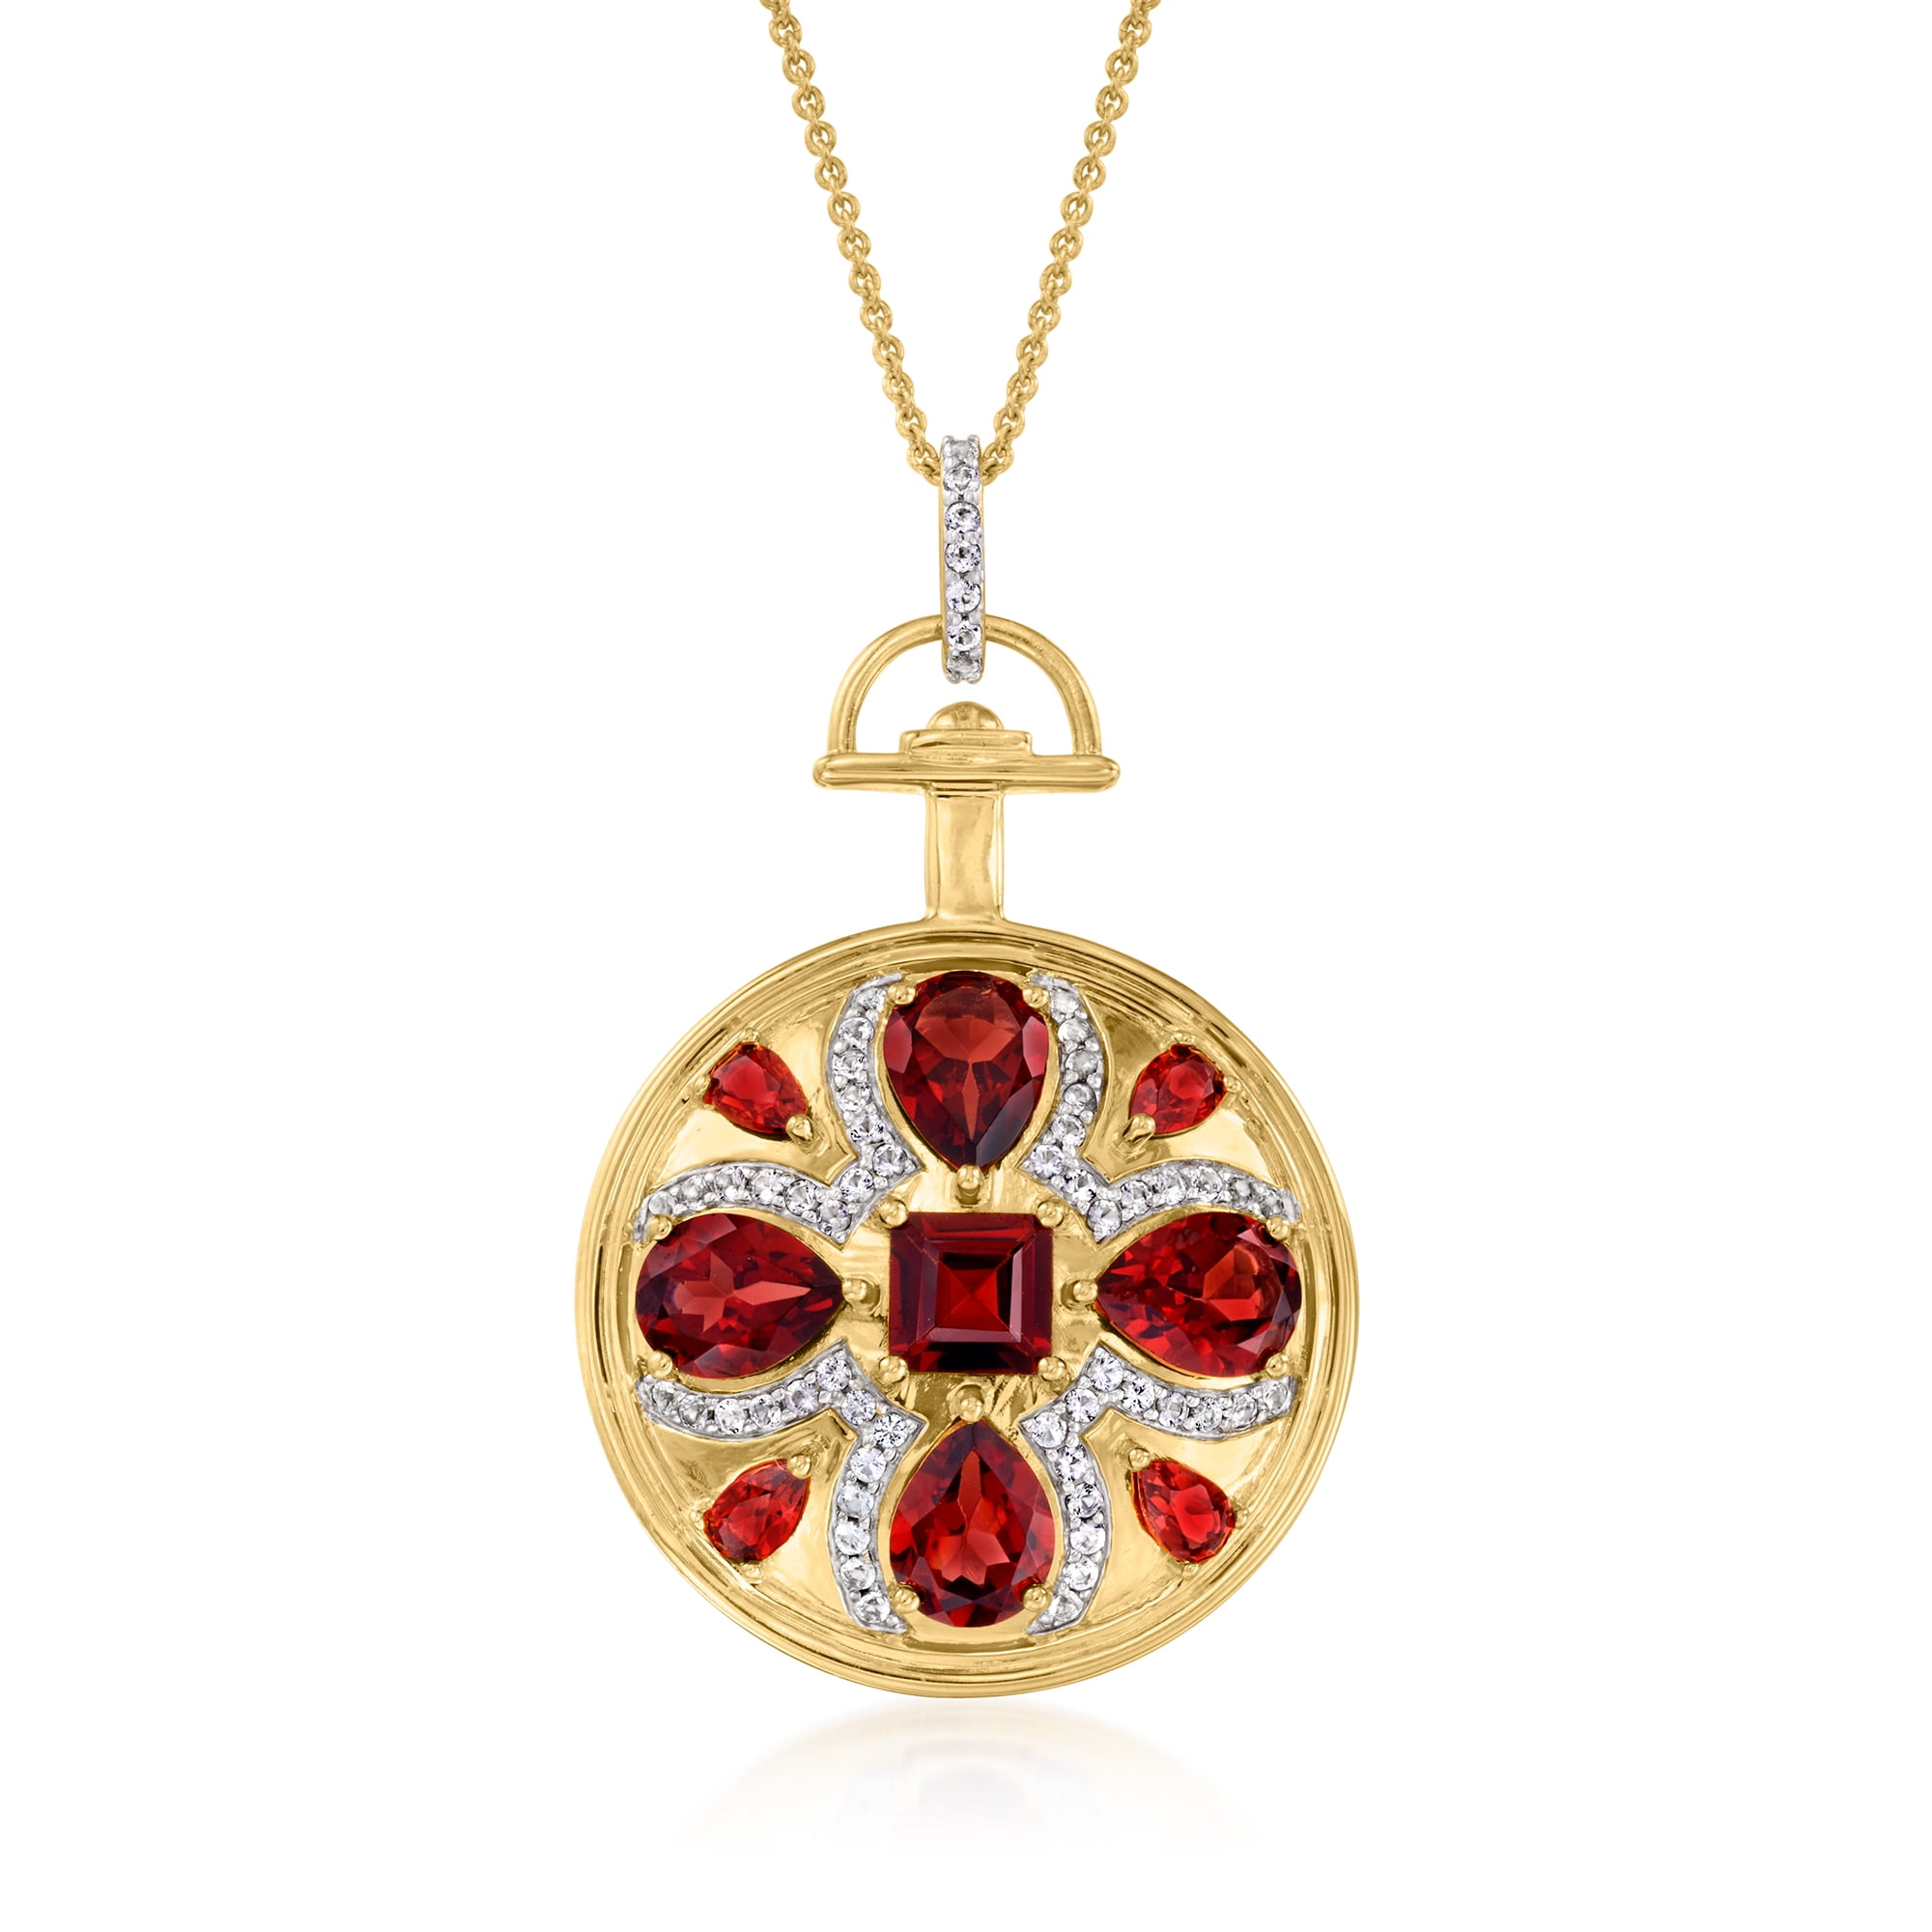 Ross-Simons 7.30 ct. t.w. Garnet and .50 ct. t.w. White Topaz Medallion  Pendant Necklace in 18kt Gold Over Sterling